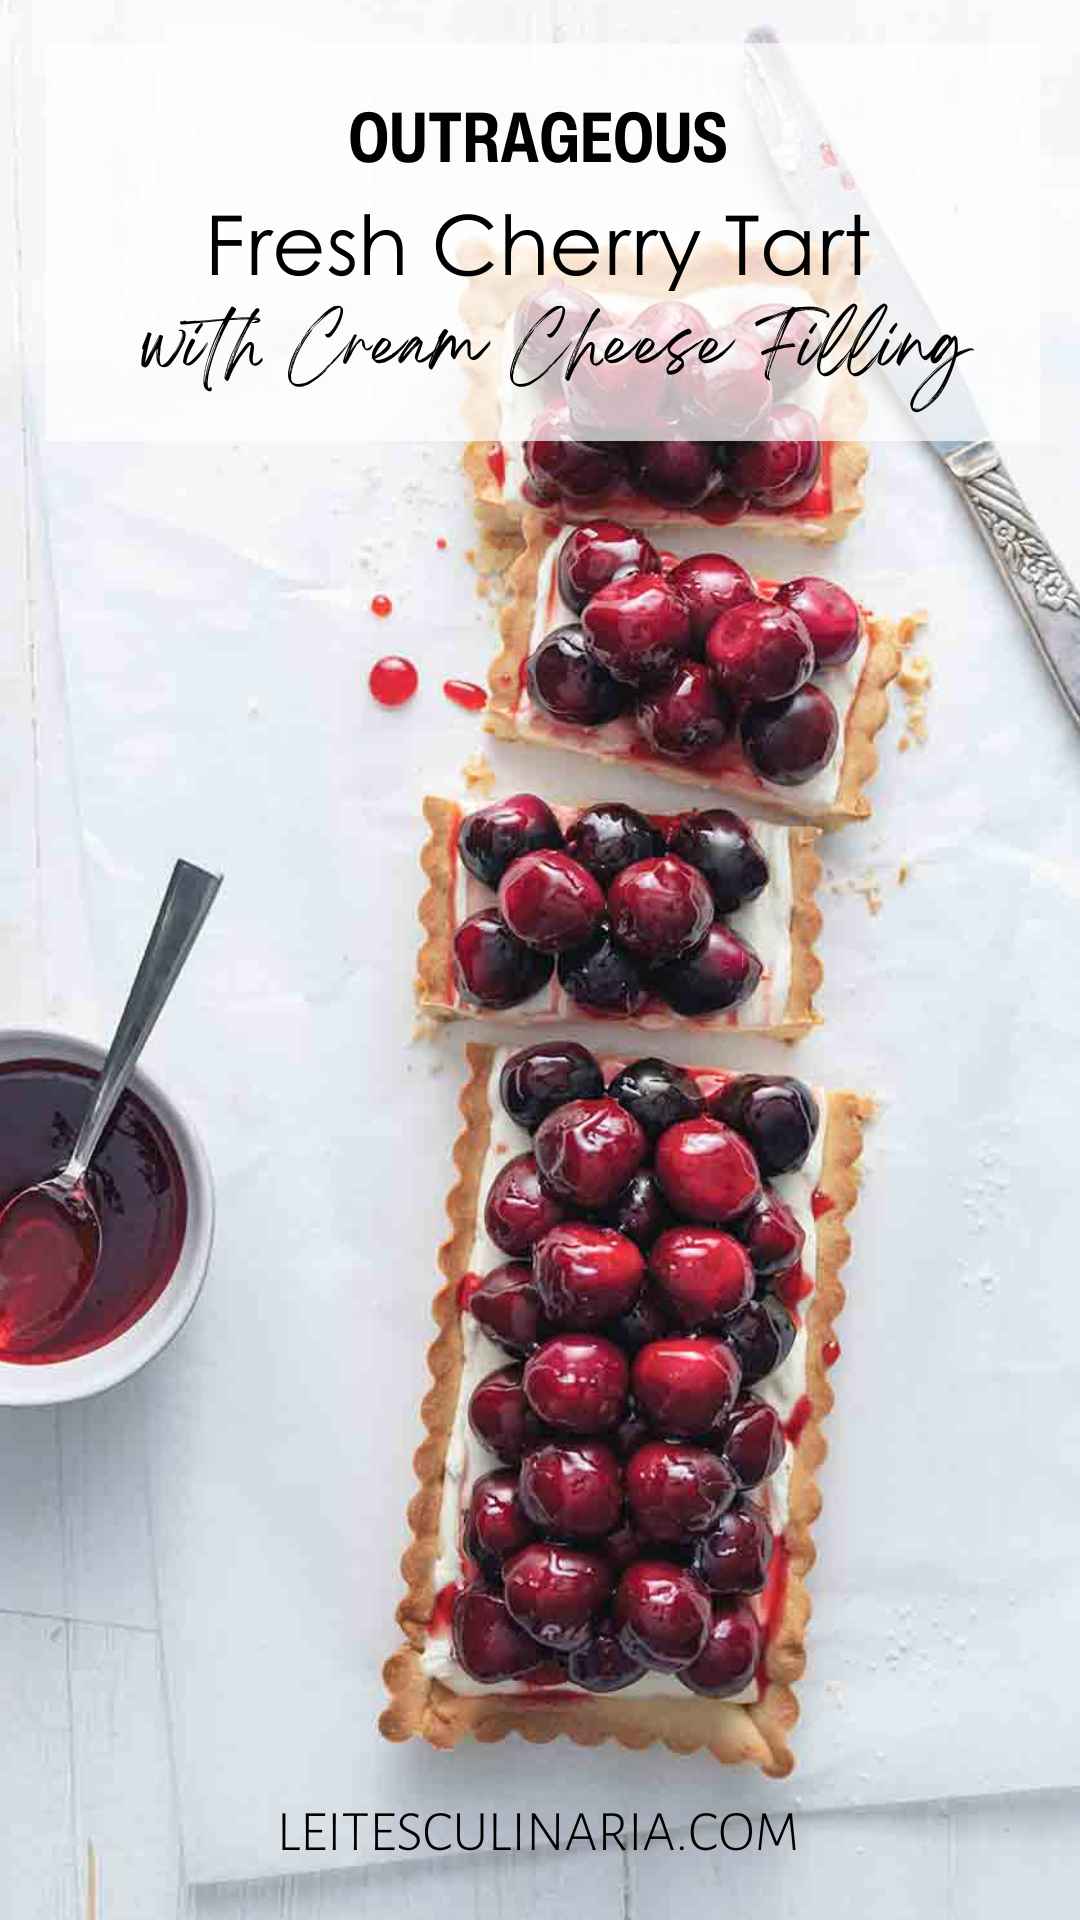 A rectangular tart filled with cream cheese filling and topped with fresh cherries cut into several pieces.